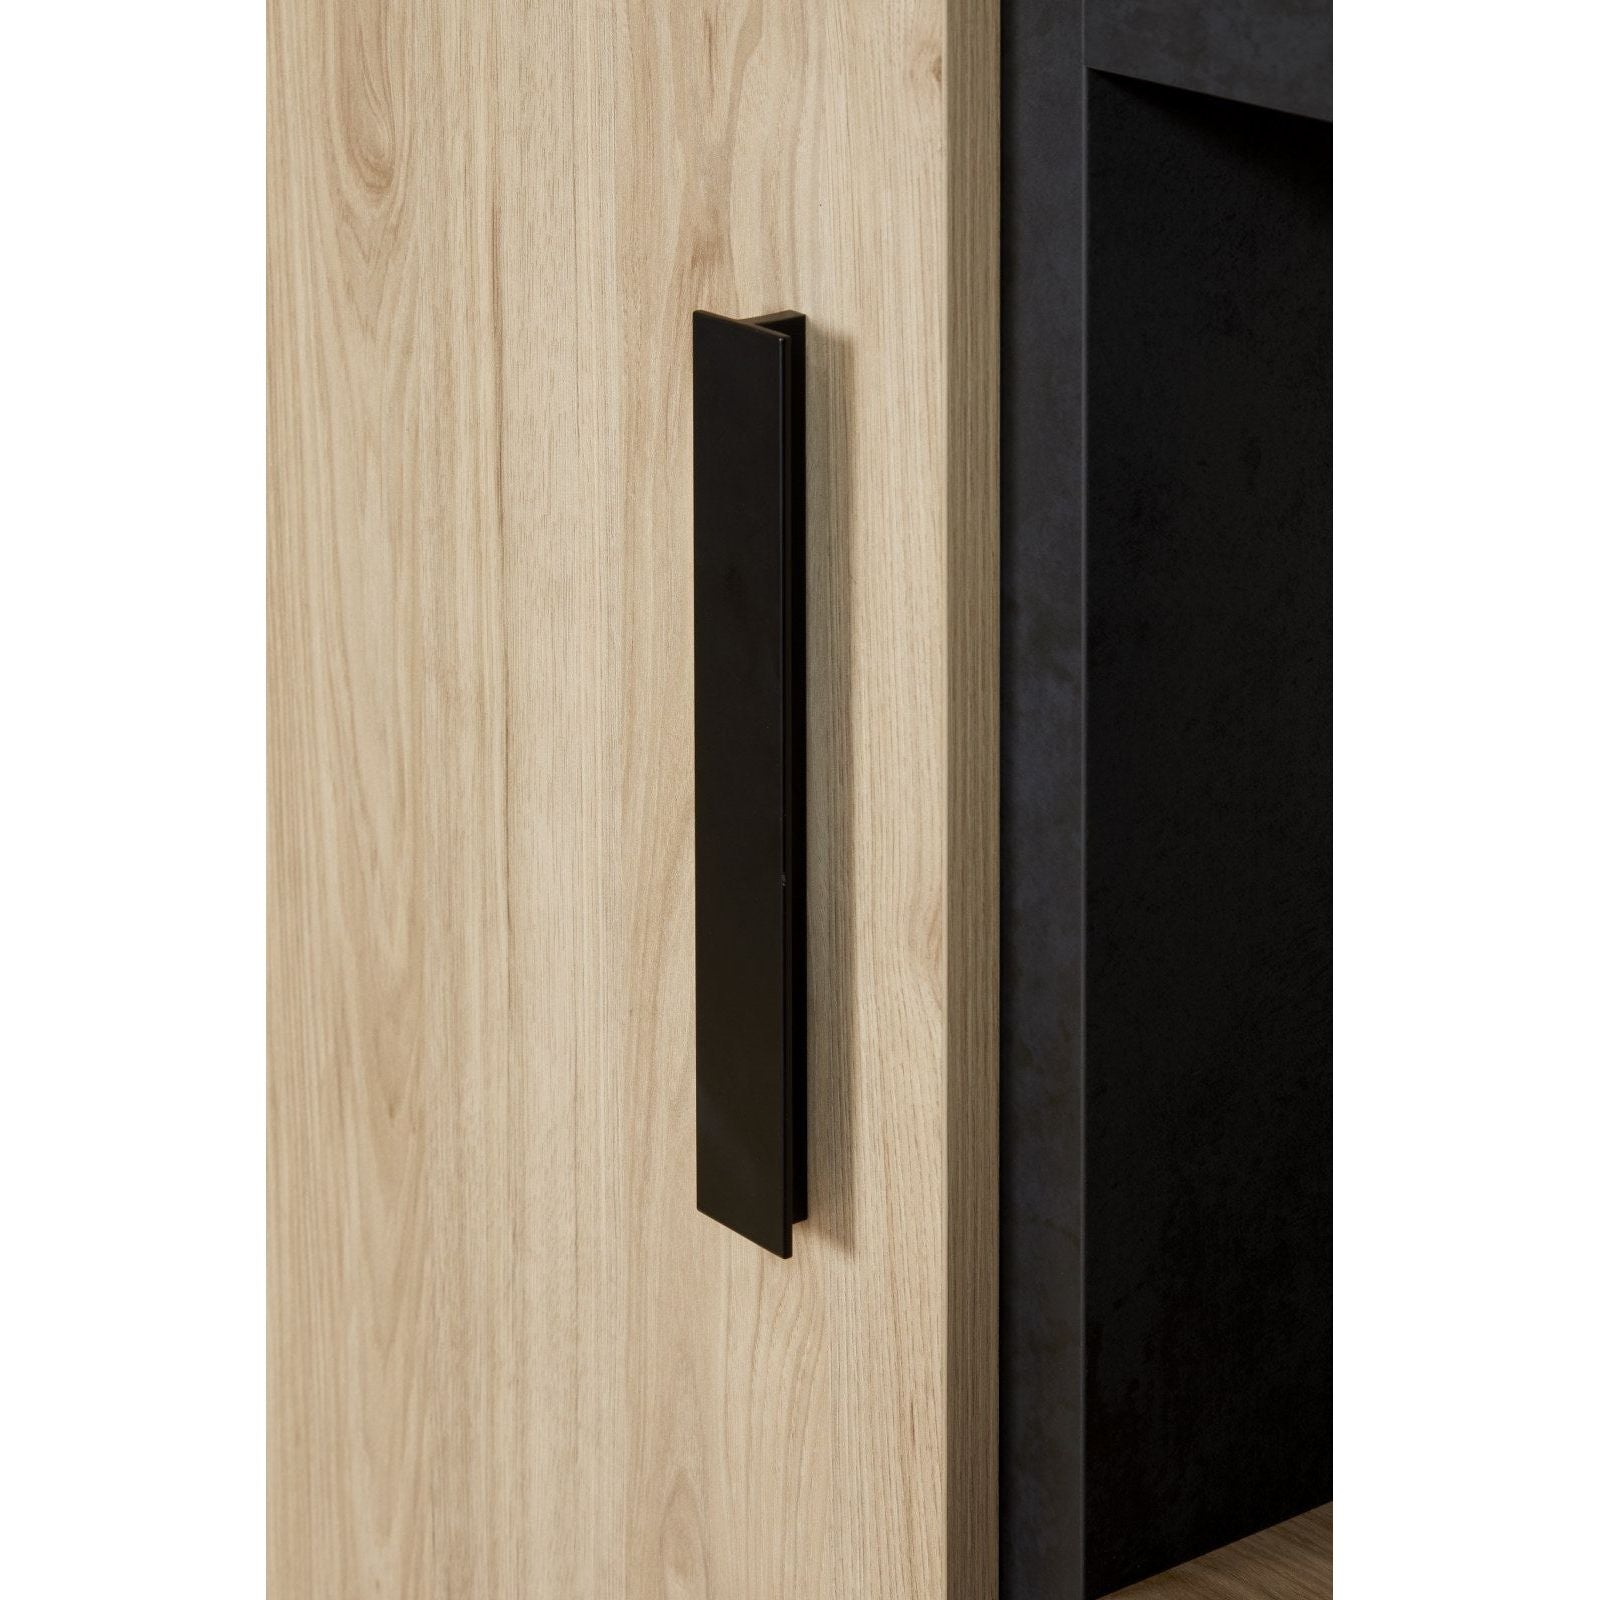 Wall cabinet | Furniture series Tilly | brown, natural, black | 115x